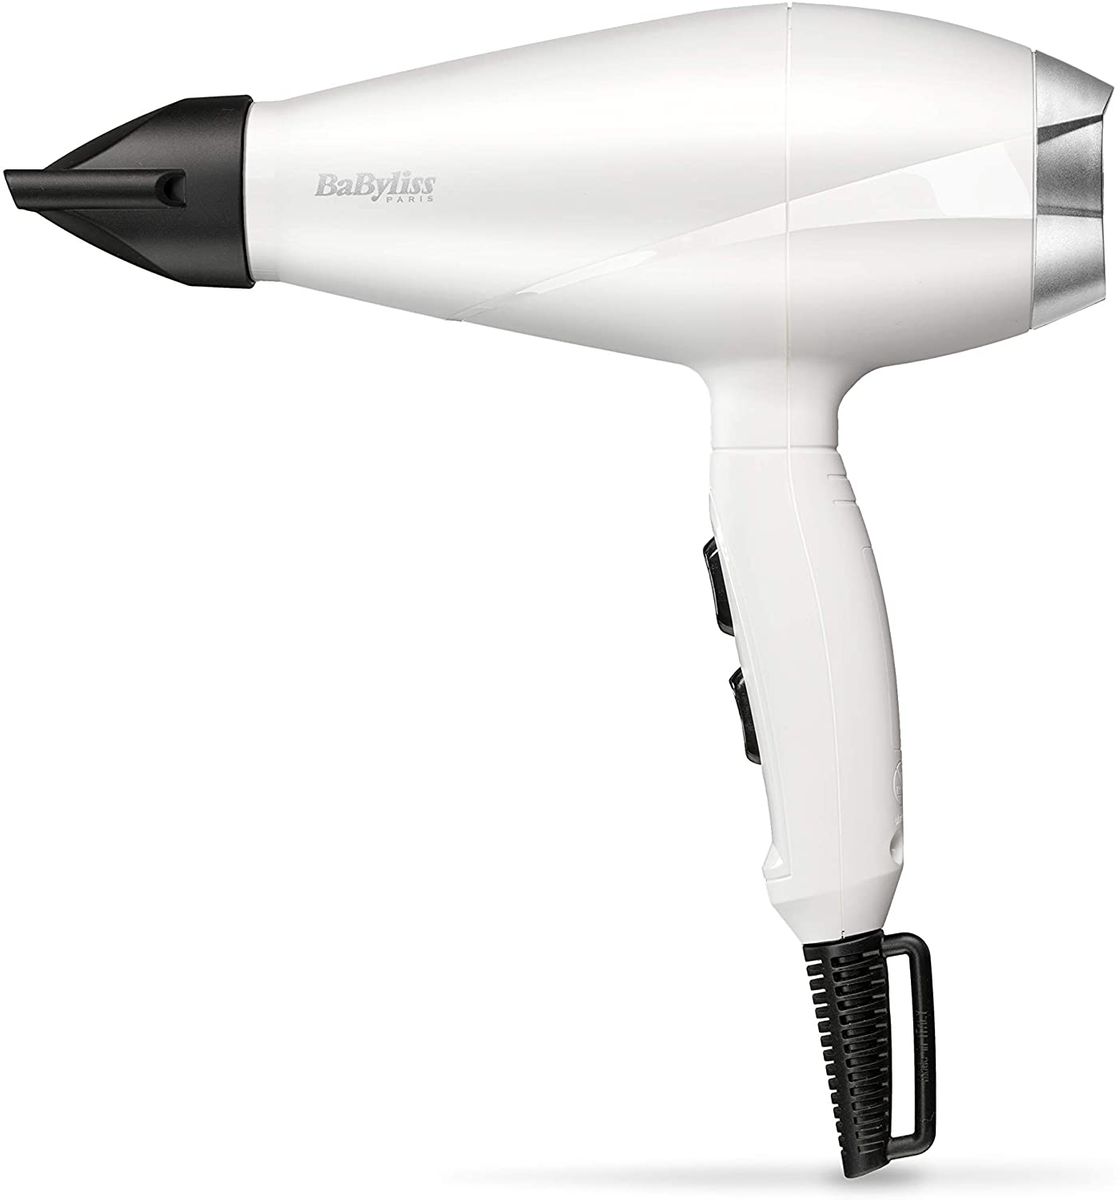 BaByliss 2000 Pro Speed professional hair dryer, matt white, AC motor, 2000W, 100 Km/H, extra long cable, Made in Italy, 6704WE